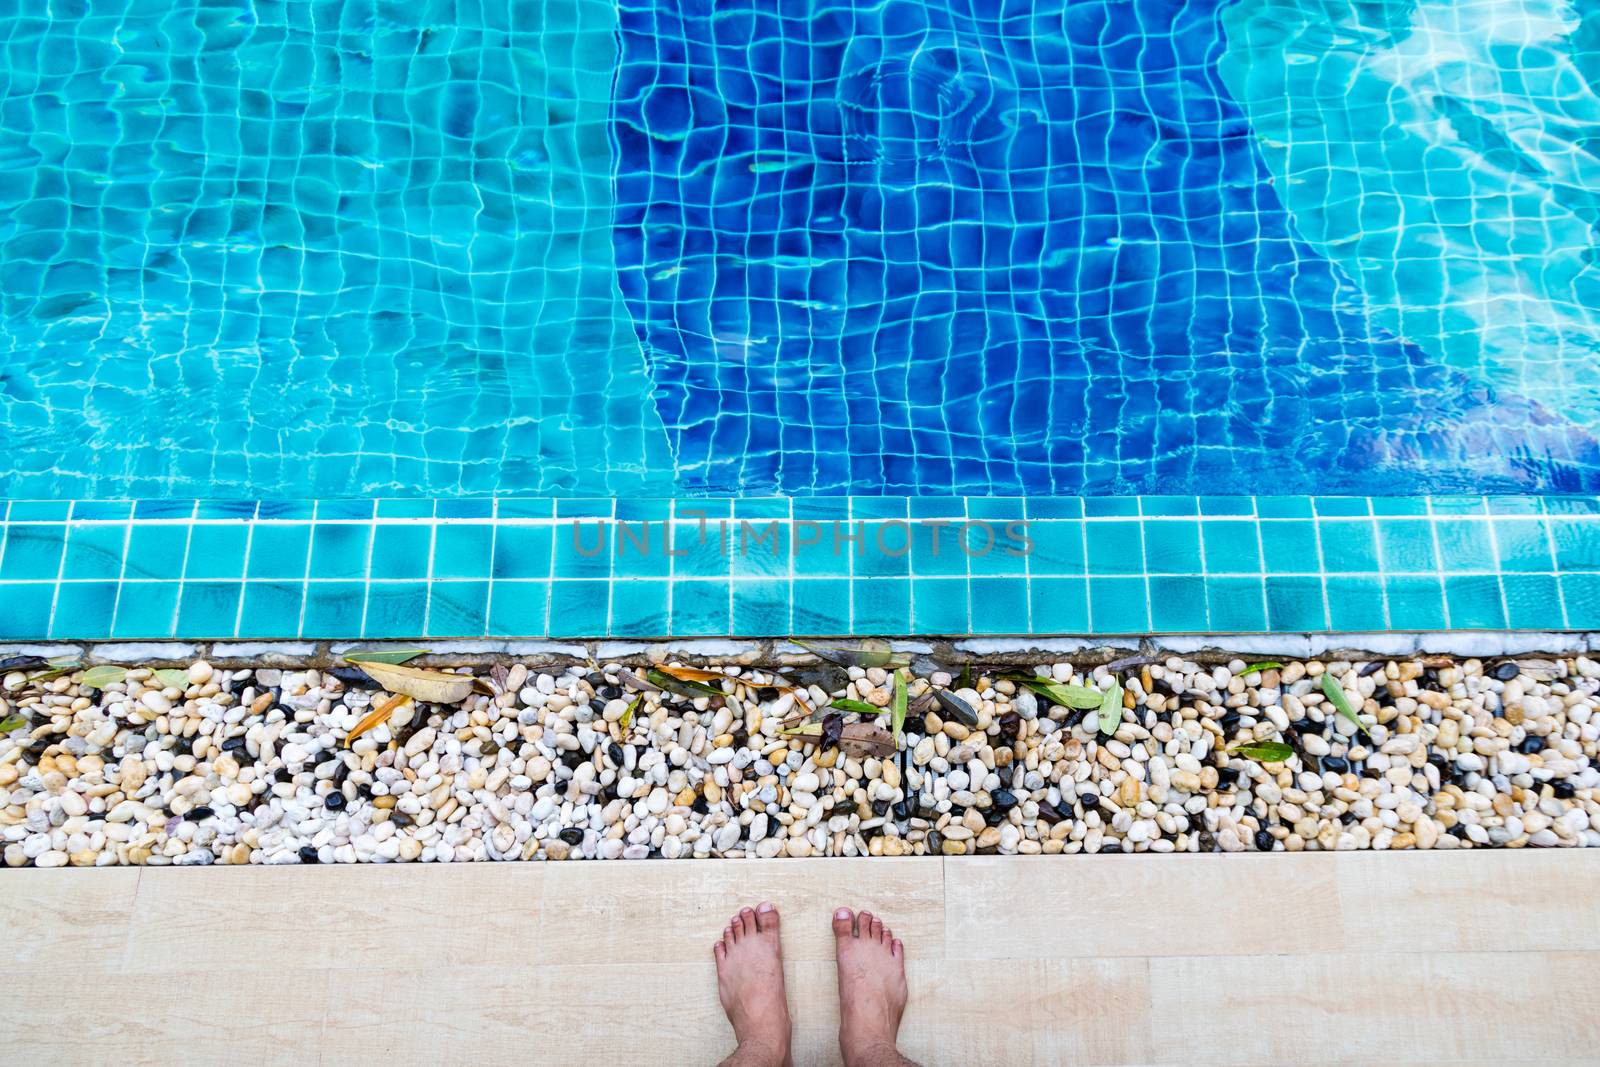 Asian man's feet standing by the pool by minamija